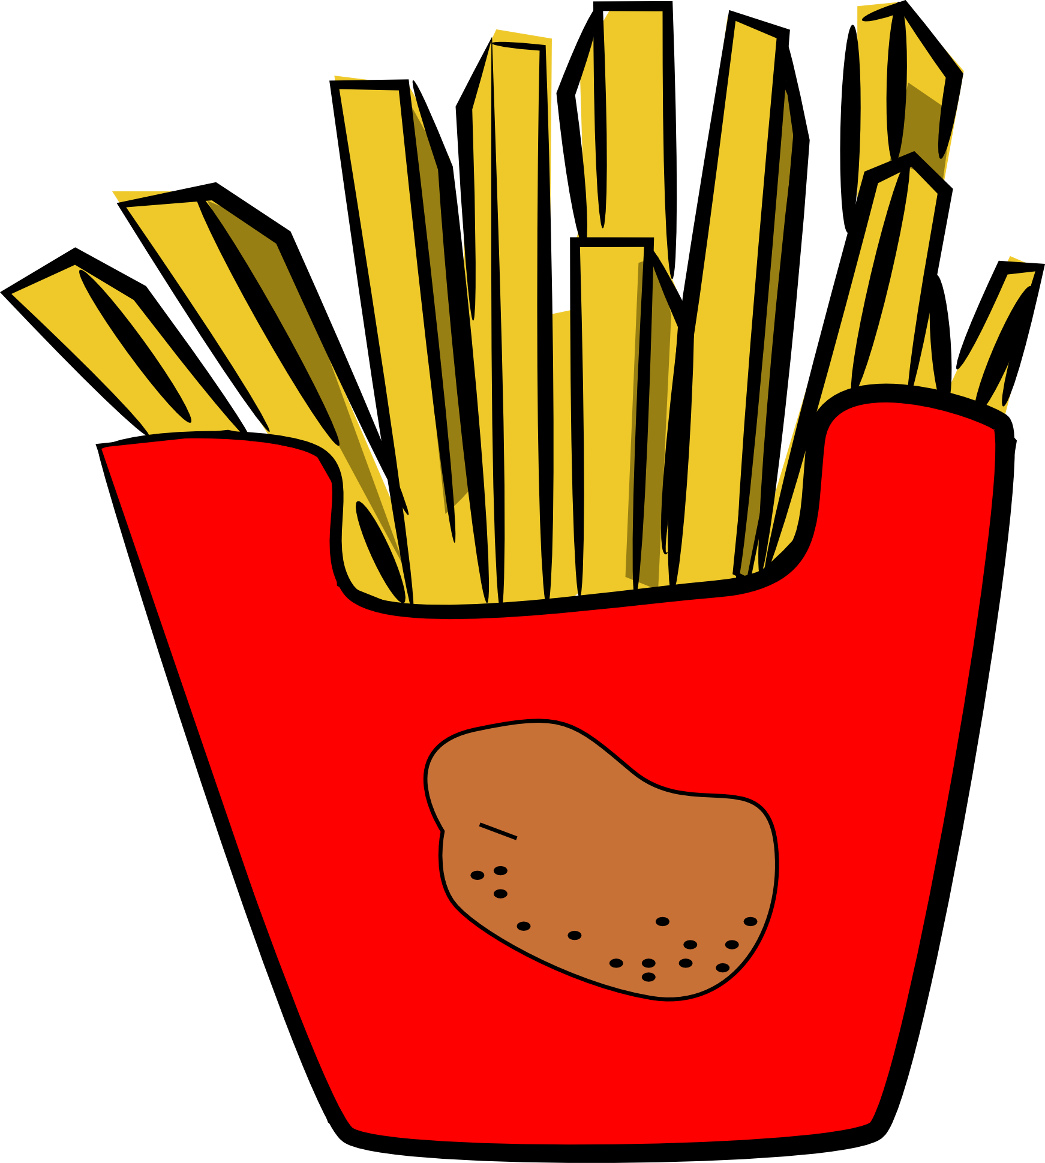 Mcdonalds French Fries - ClipArt Best